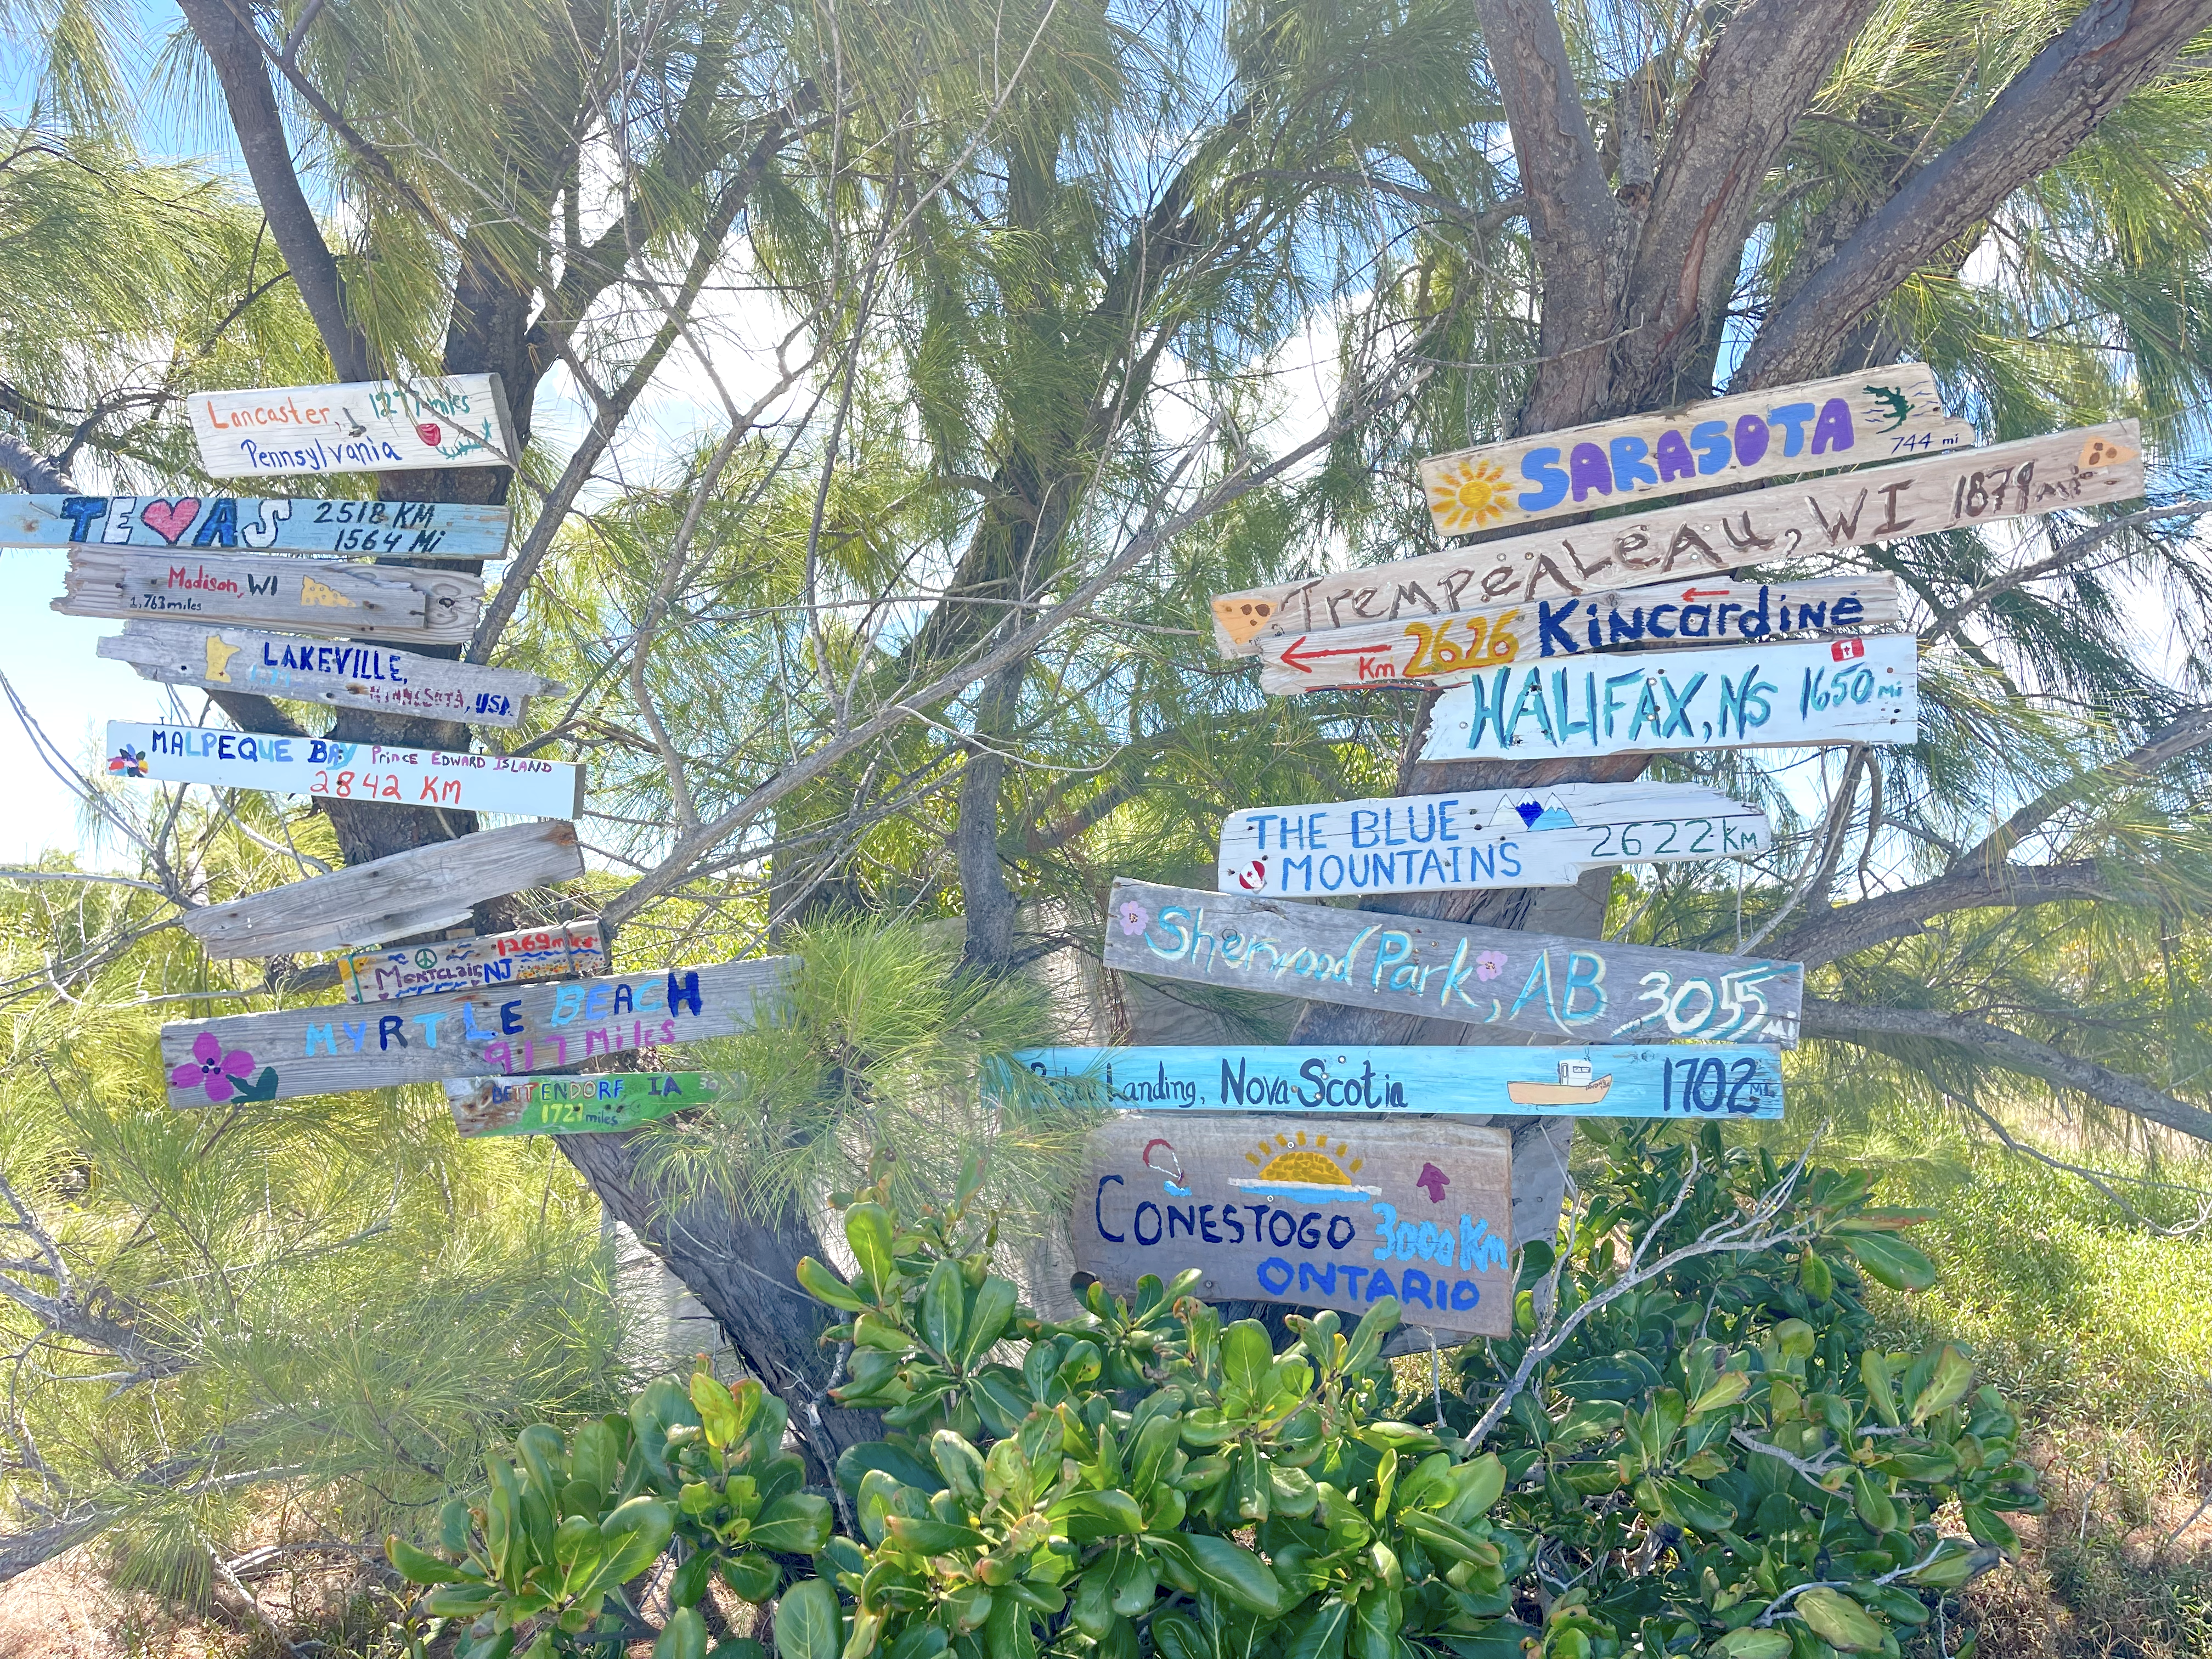 Destination signs guests have made located just up the beach.